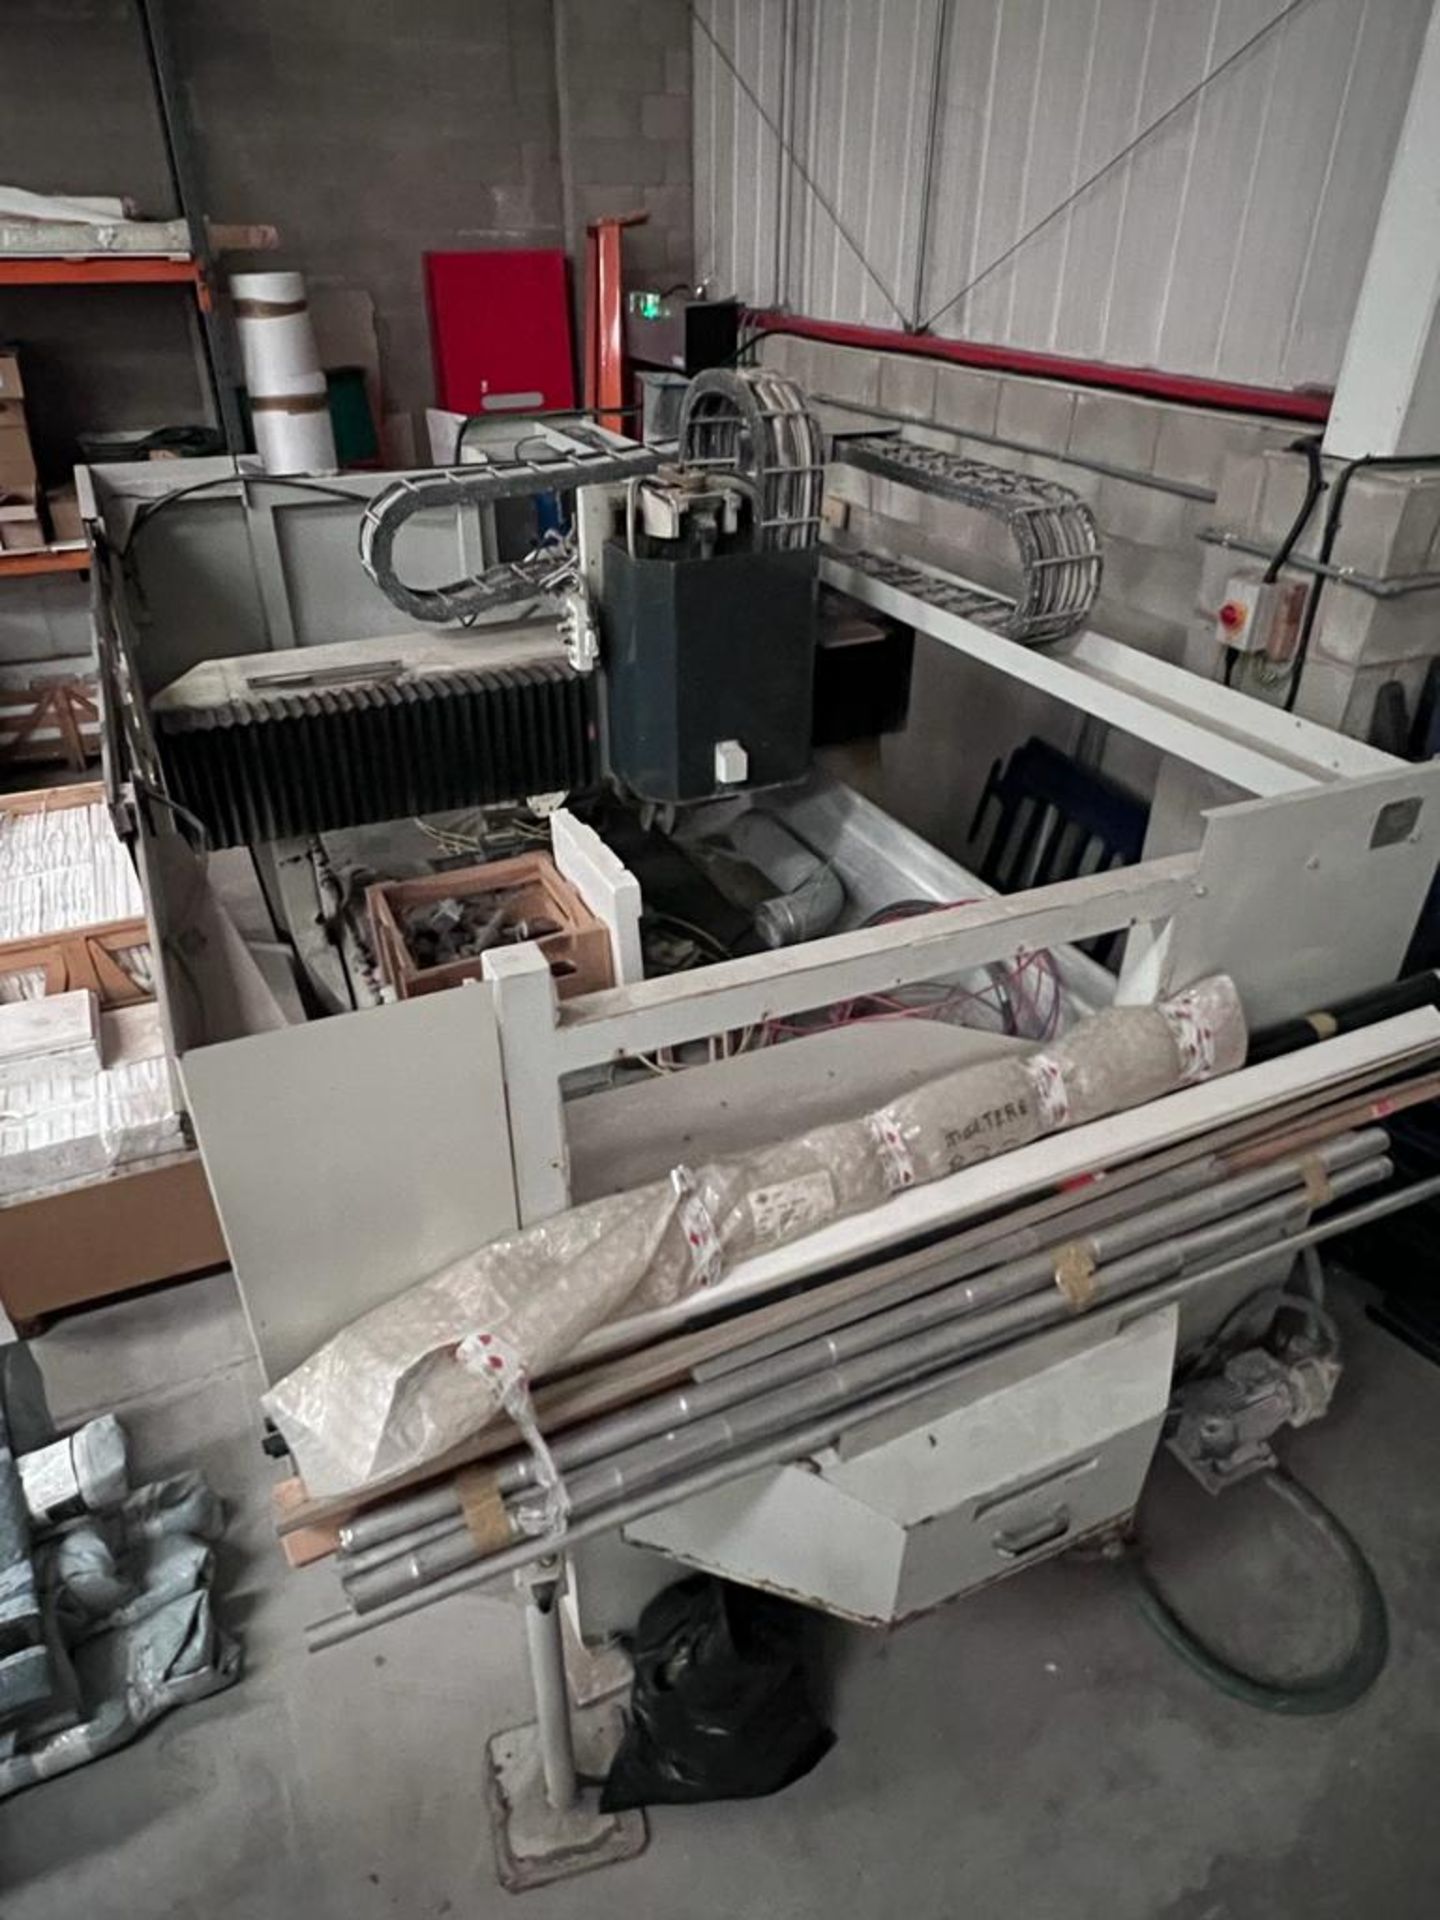 Intermac Compact Stone CNC Machine serial no. 90775 with a Broomwade Refrigerated Dryer, - Image 5 of 10